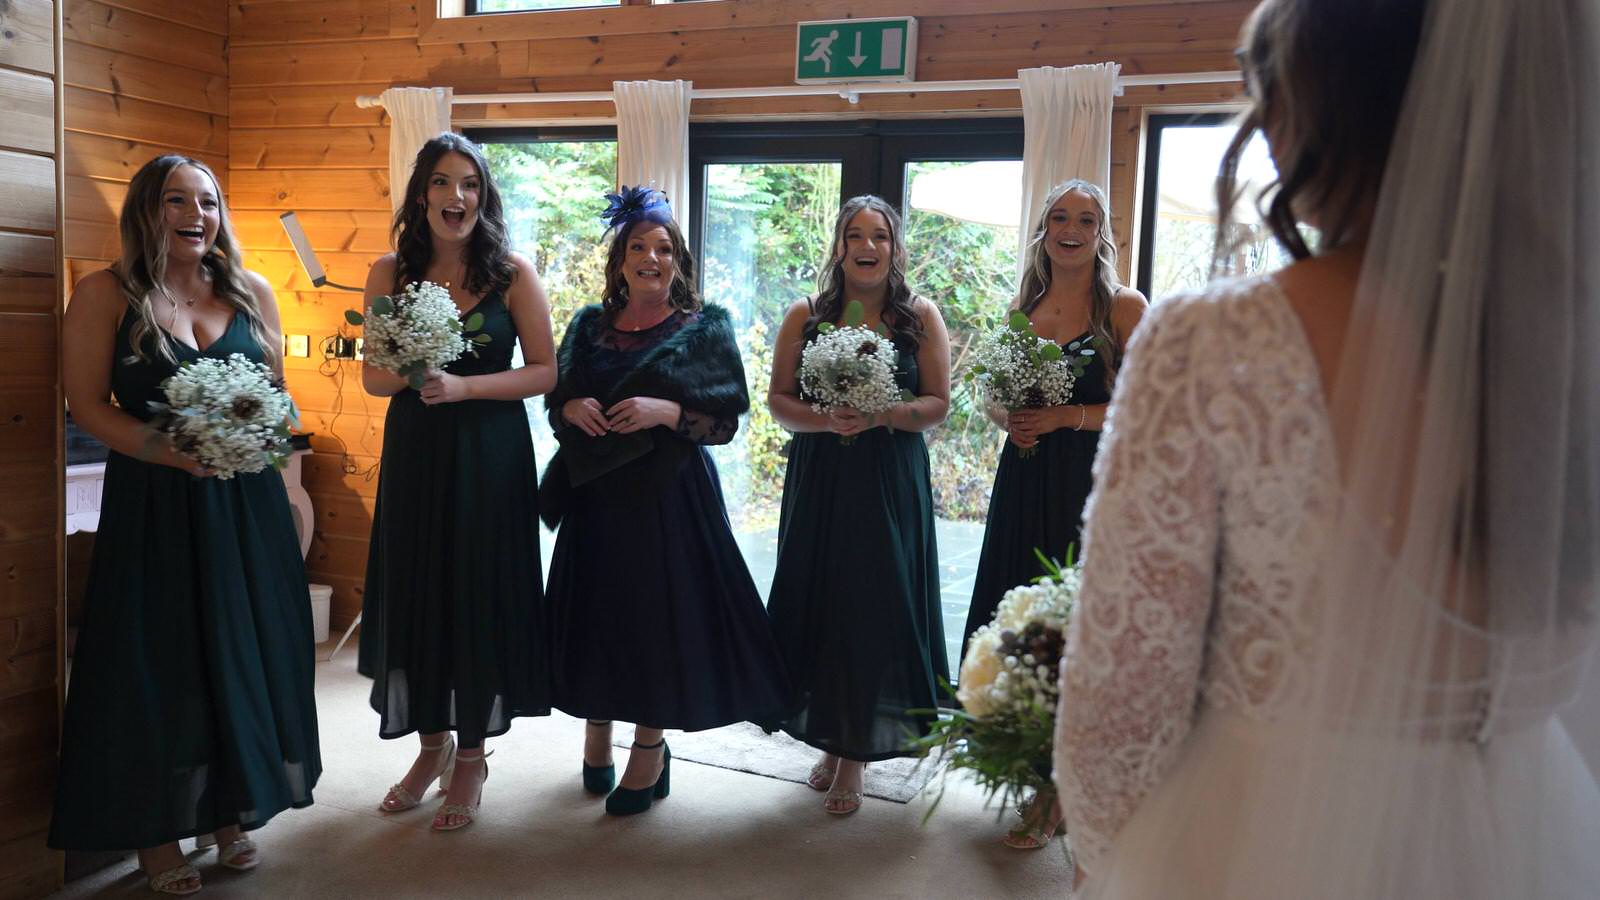 video still of bridesmaids first look reaction to bride at Styal Lodge